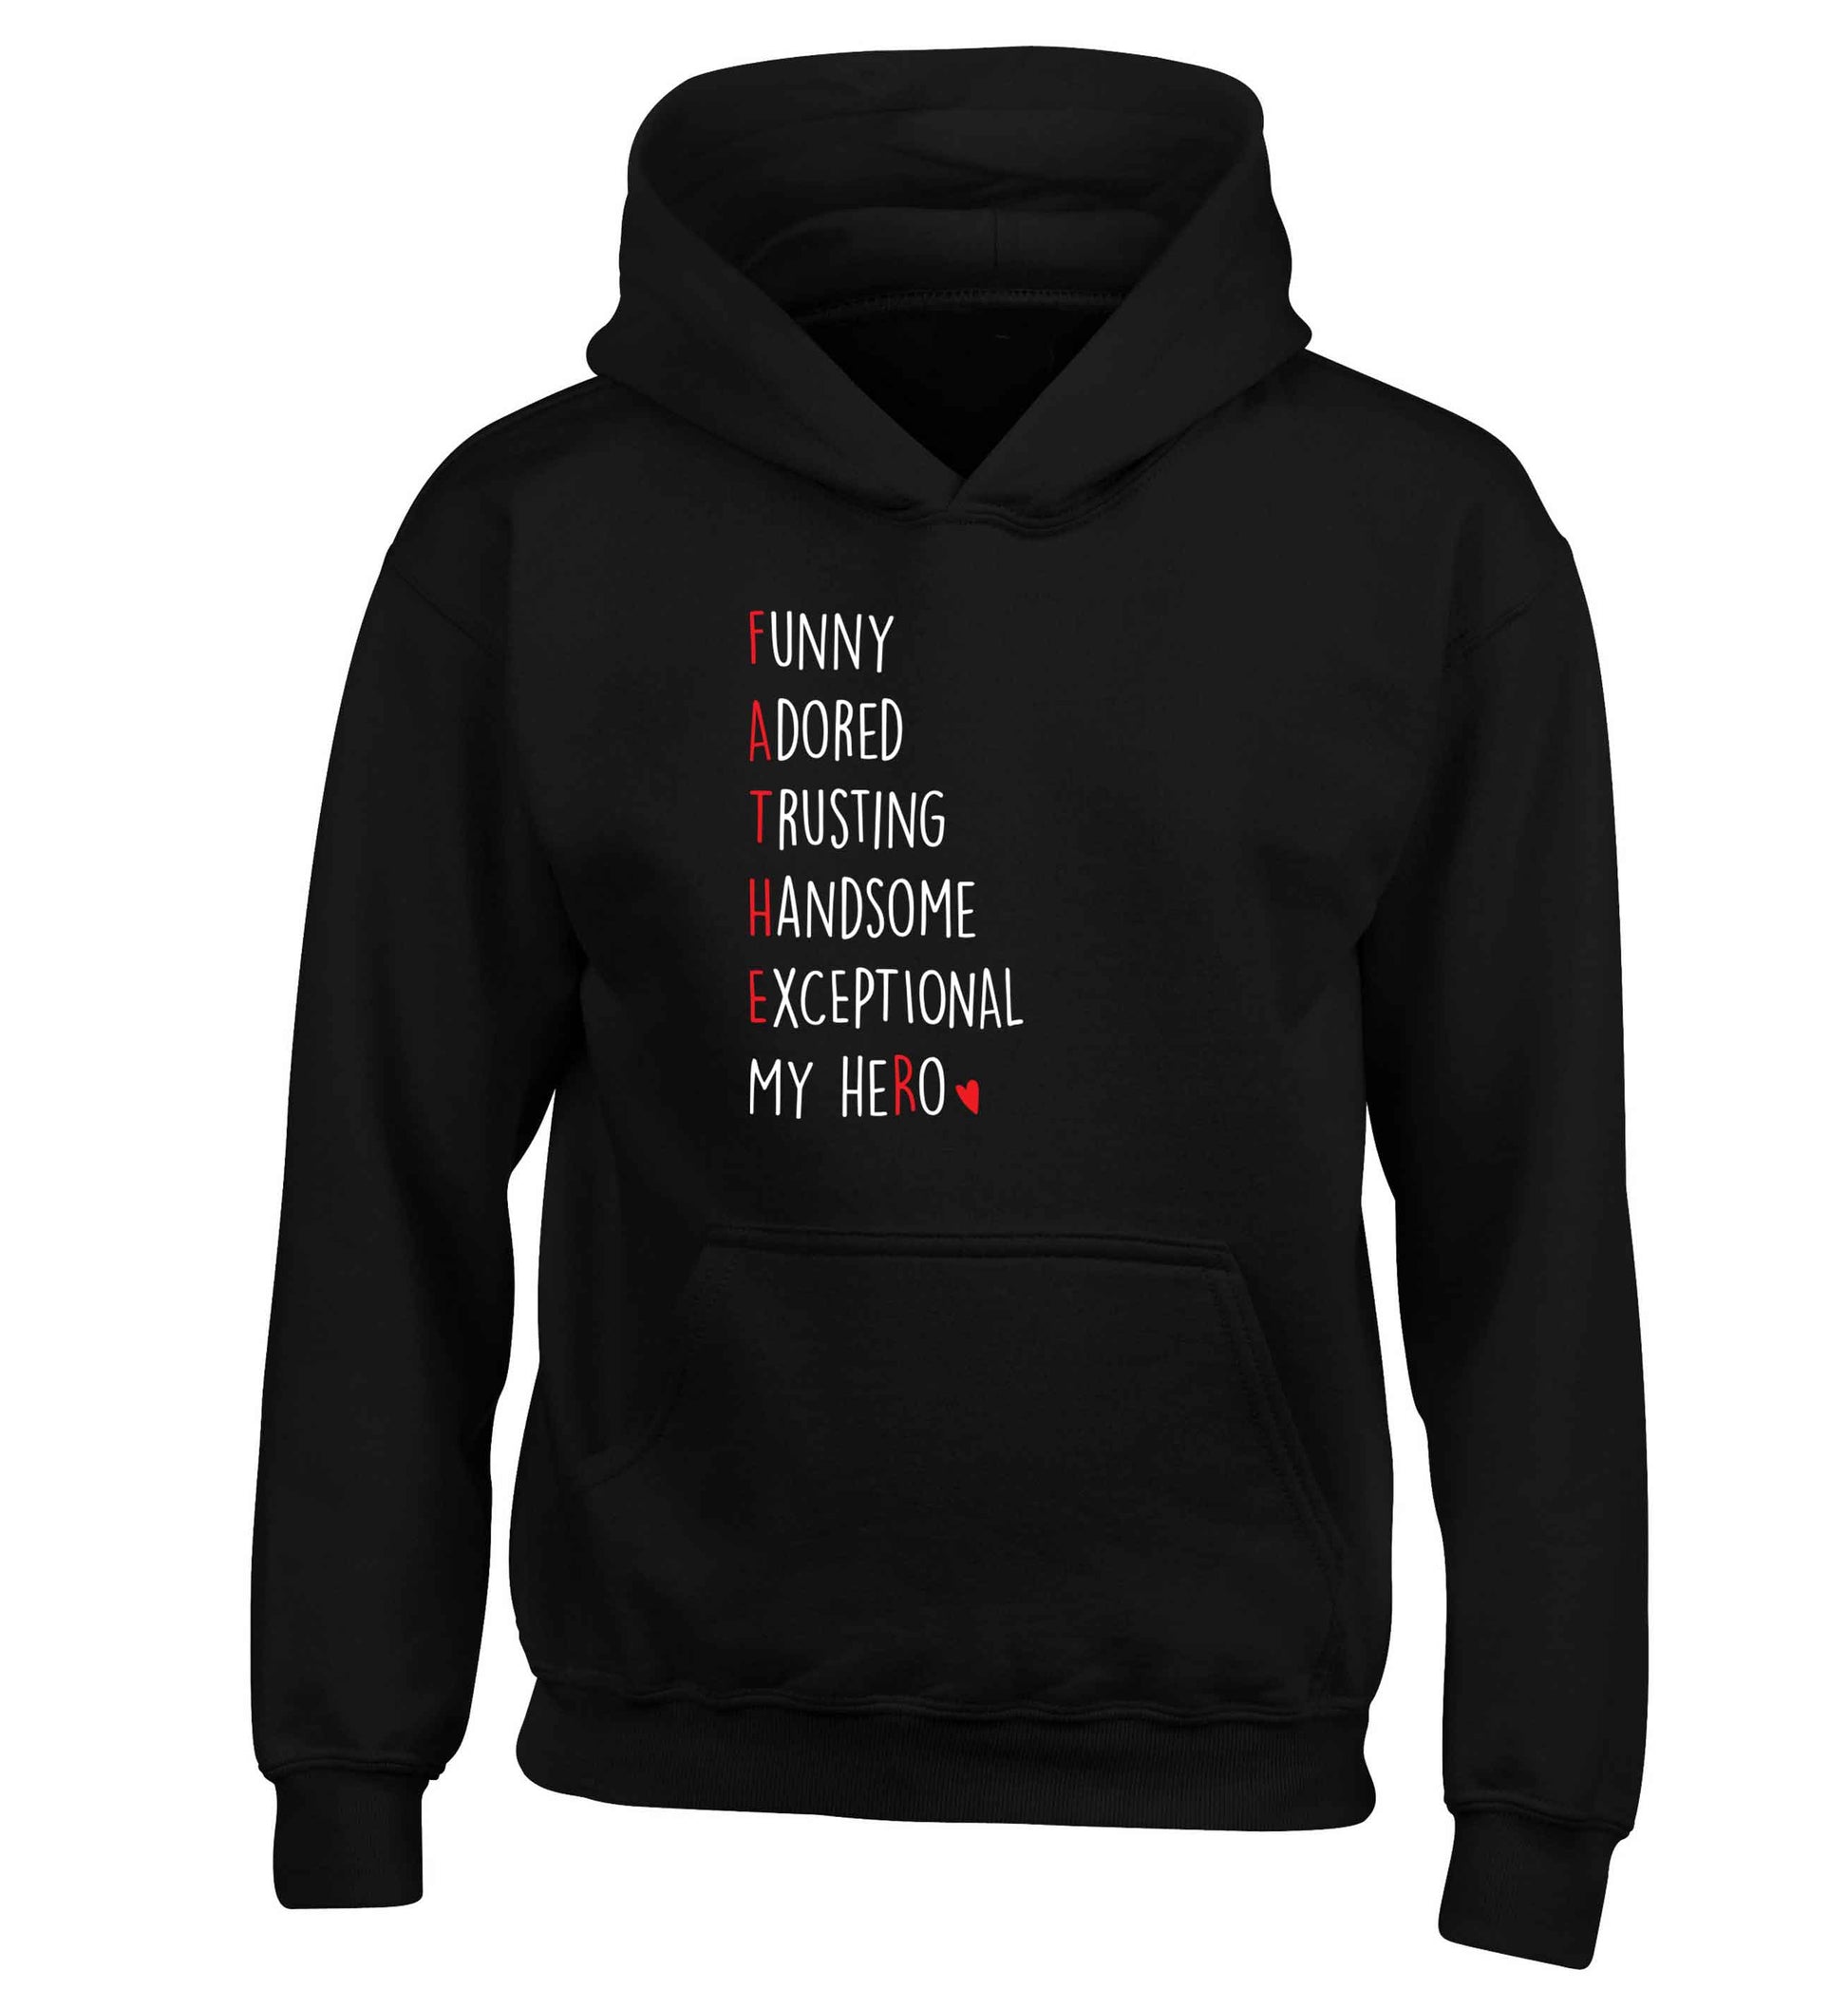 Father, funny adored trusting handsome exceptional my hero children's black hoodie 12-13 Years